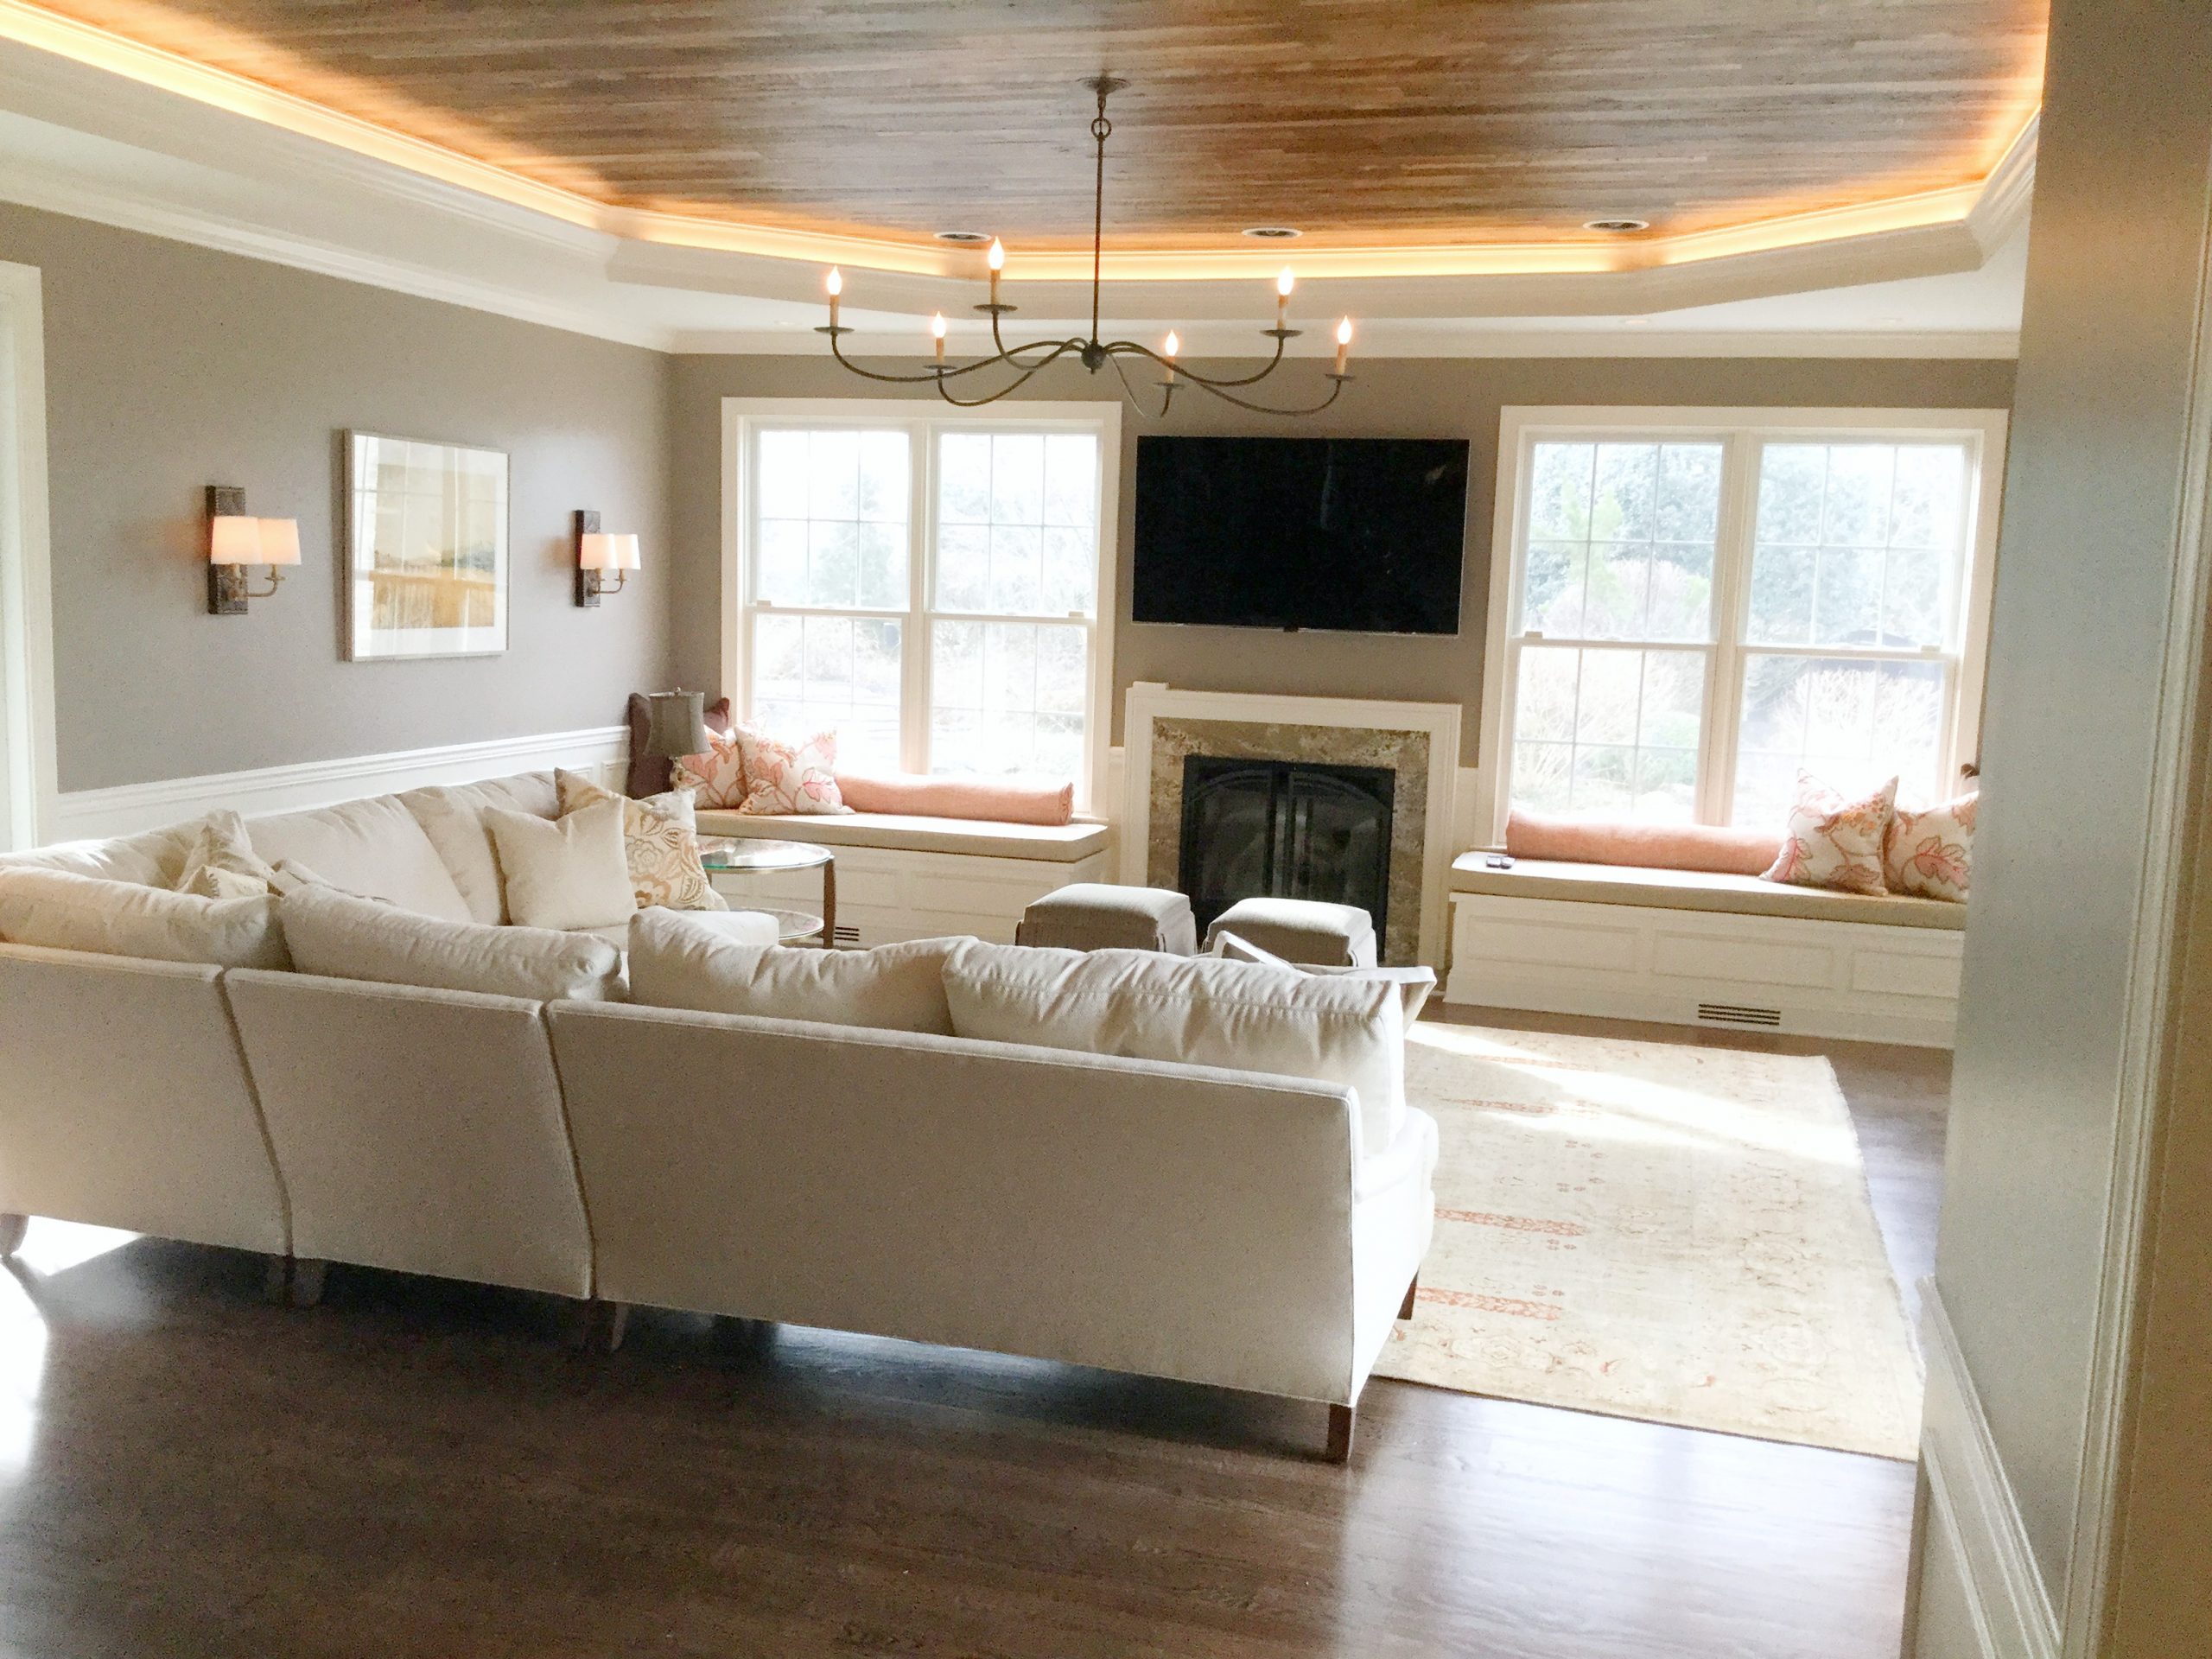 Transitional family room with black metal chandelier, hardwood ceiling and beige furniture